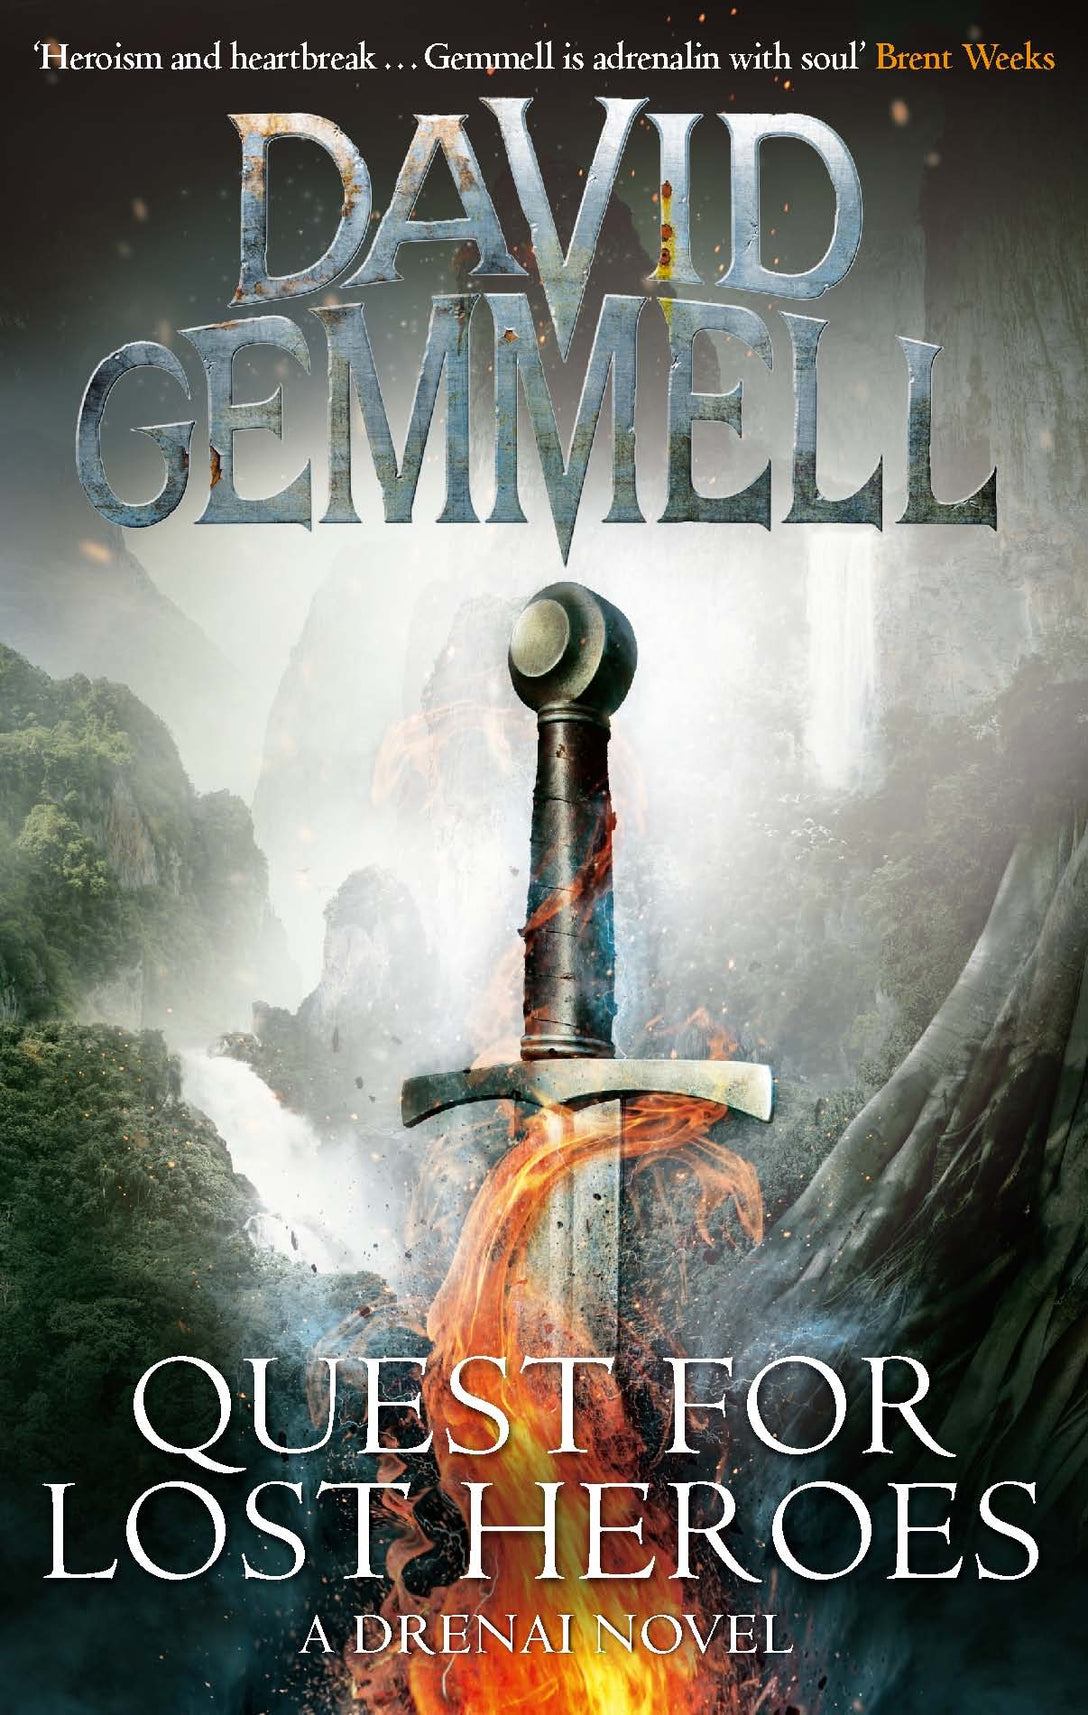 Quest For Lost Heroes by David Gemmell